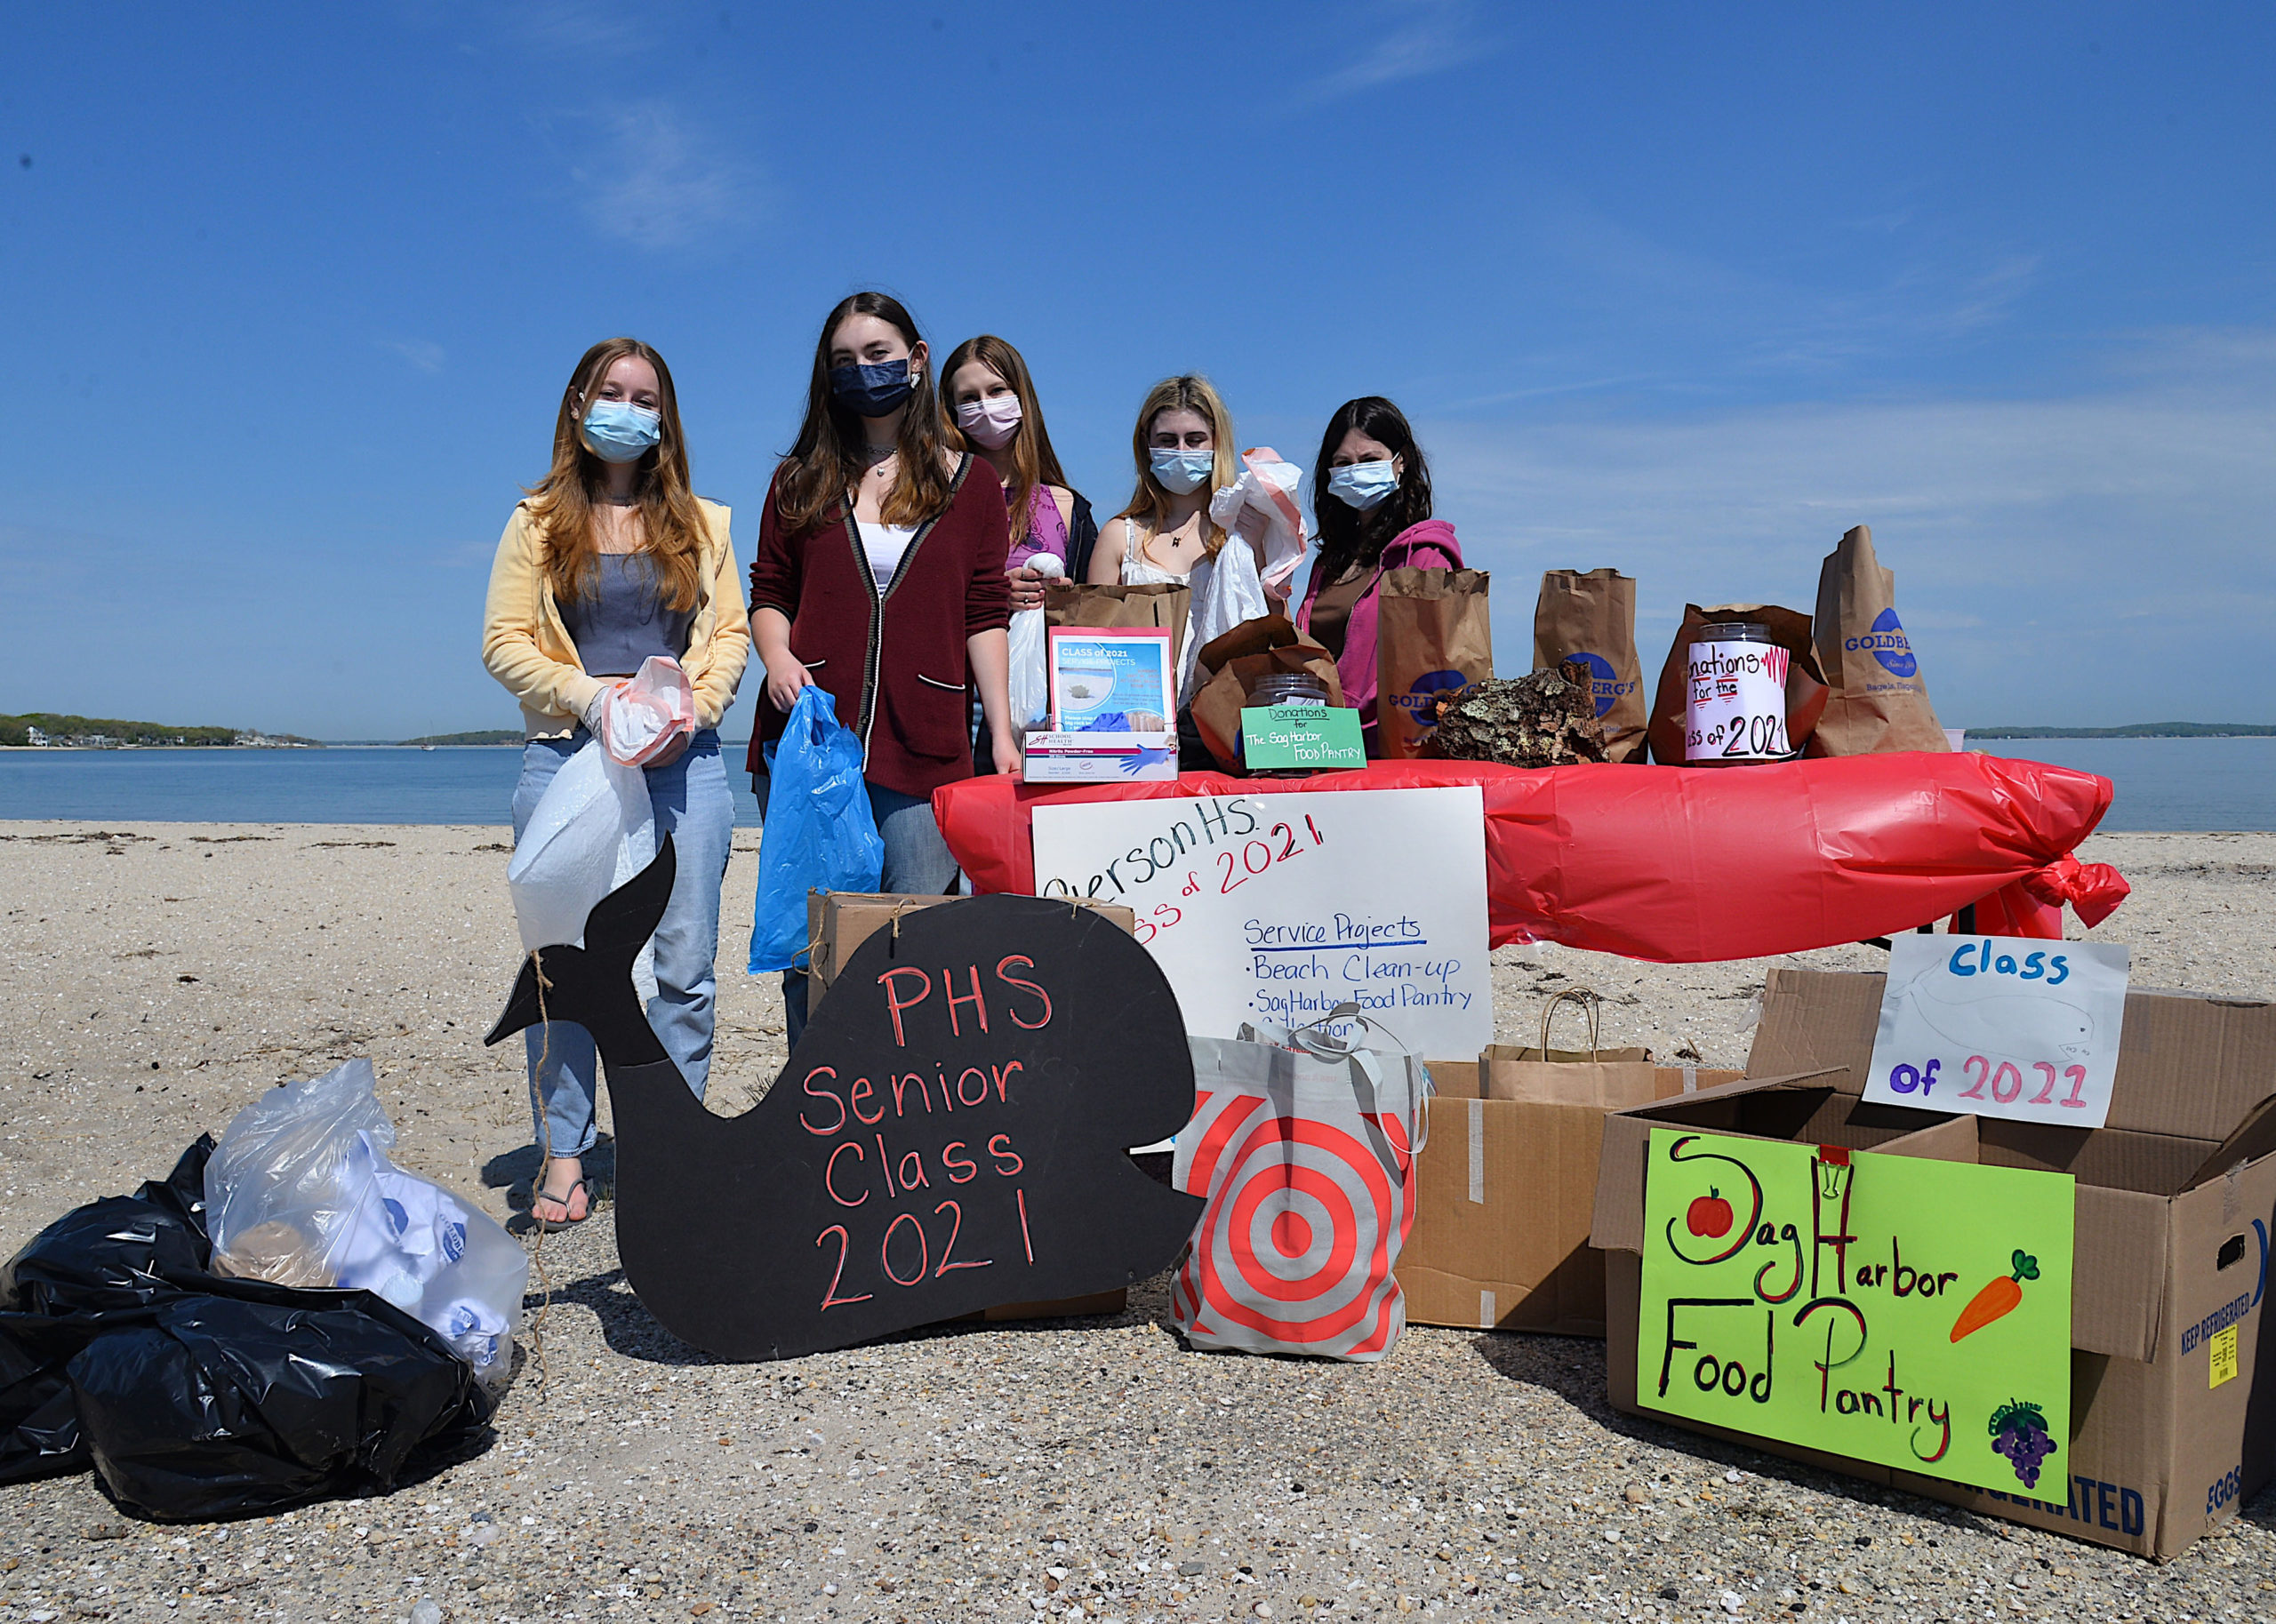 Pierson seniors Francesca Vitale, Jamie Farnam, Tess Norris, Sarah Van Houten and Emily Brownstein at Long Beach on Sunday morning for beach clean up and food pantry donations.  KYRIL BROMLEY